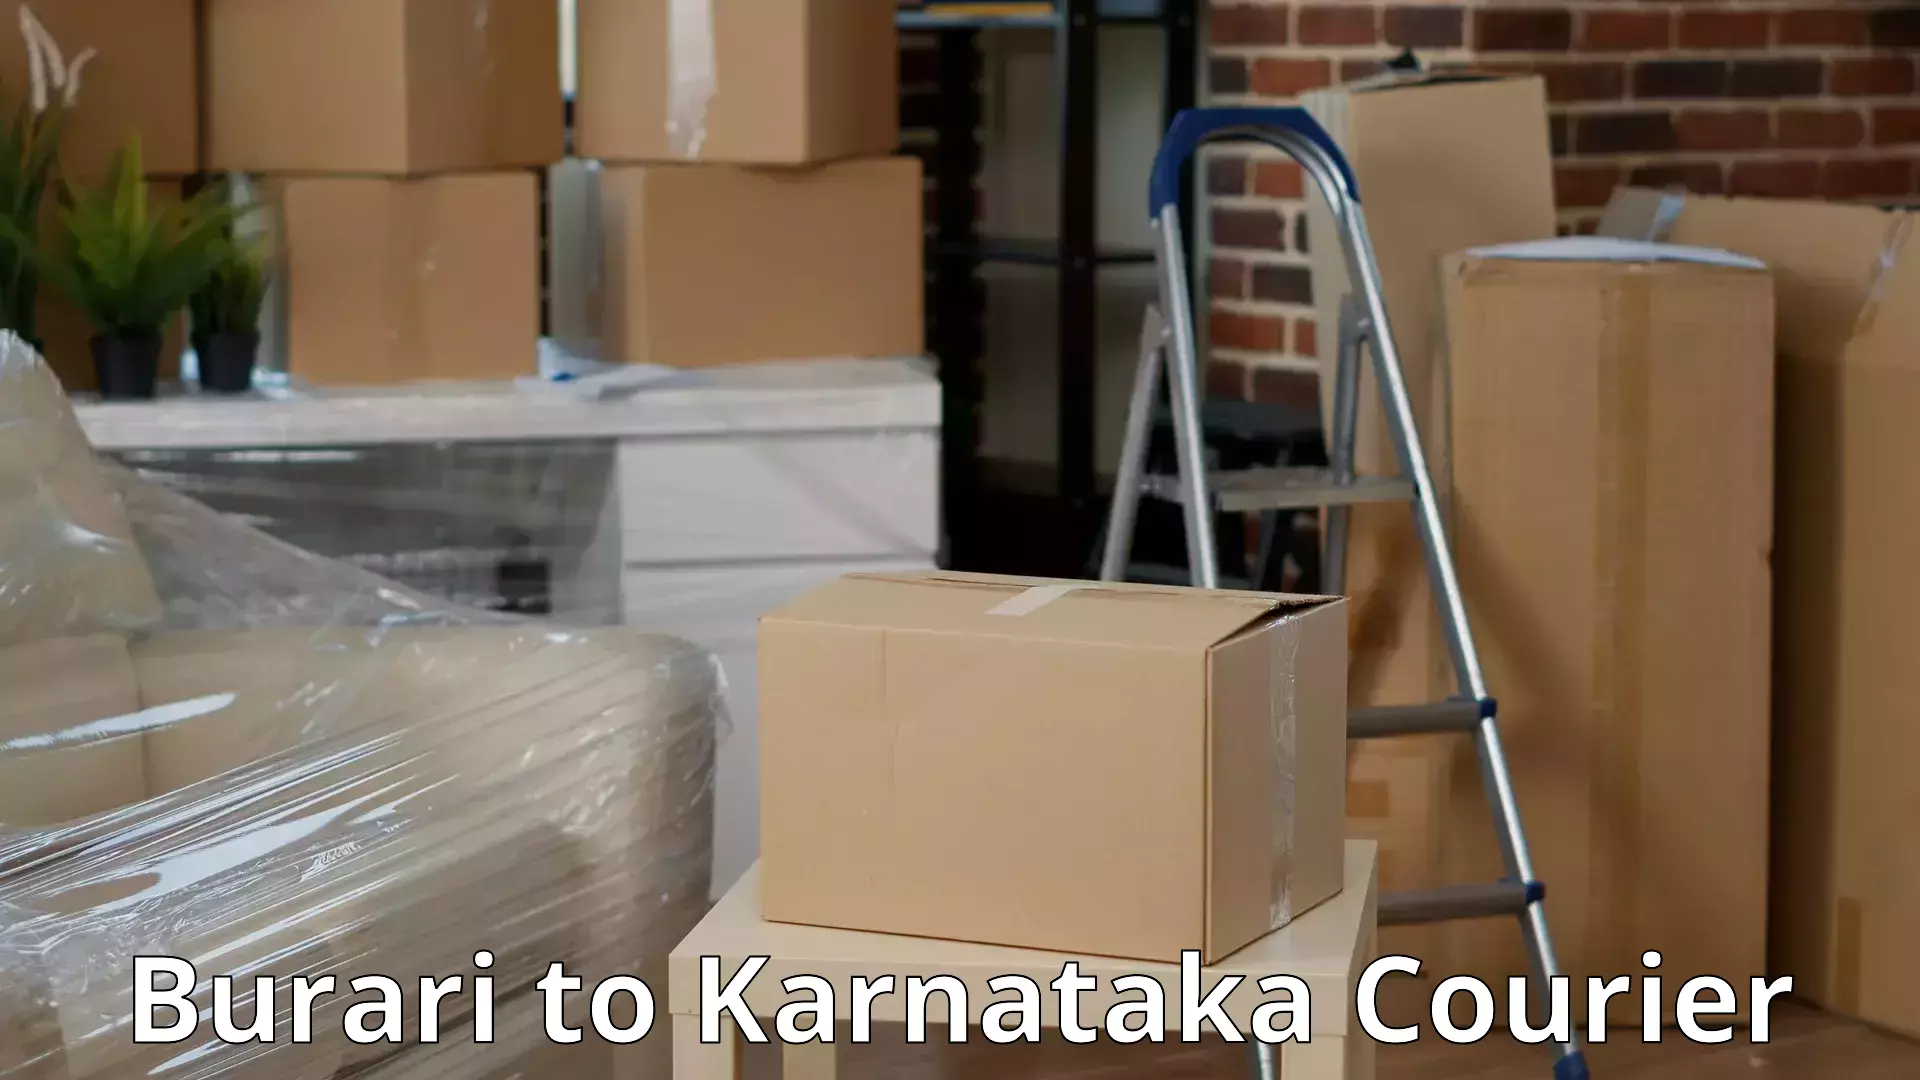 Moving and storage services Burari to Sirsi